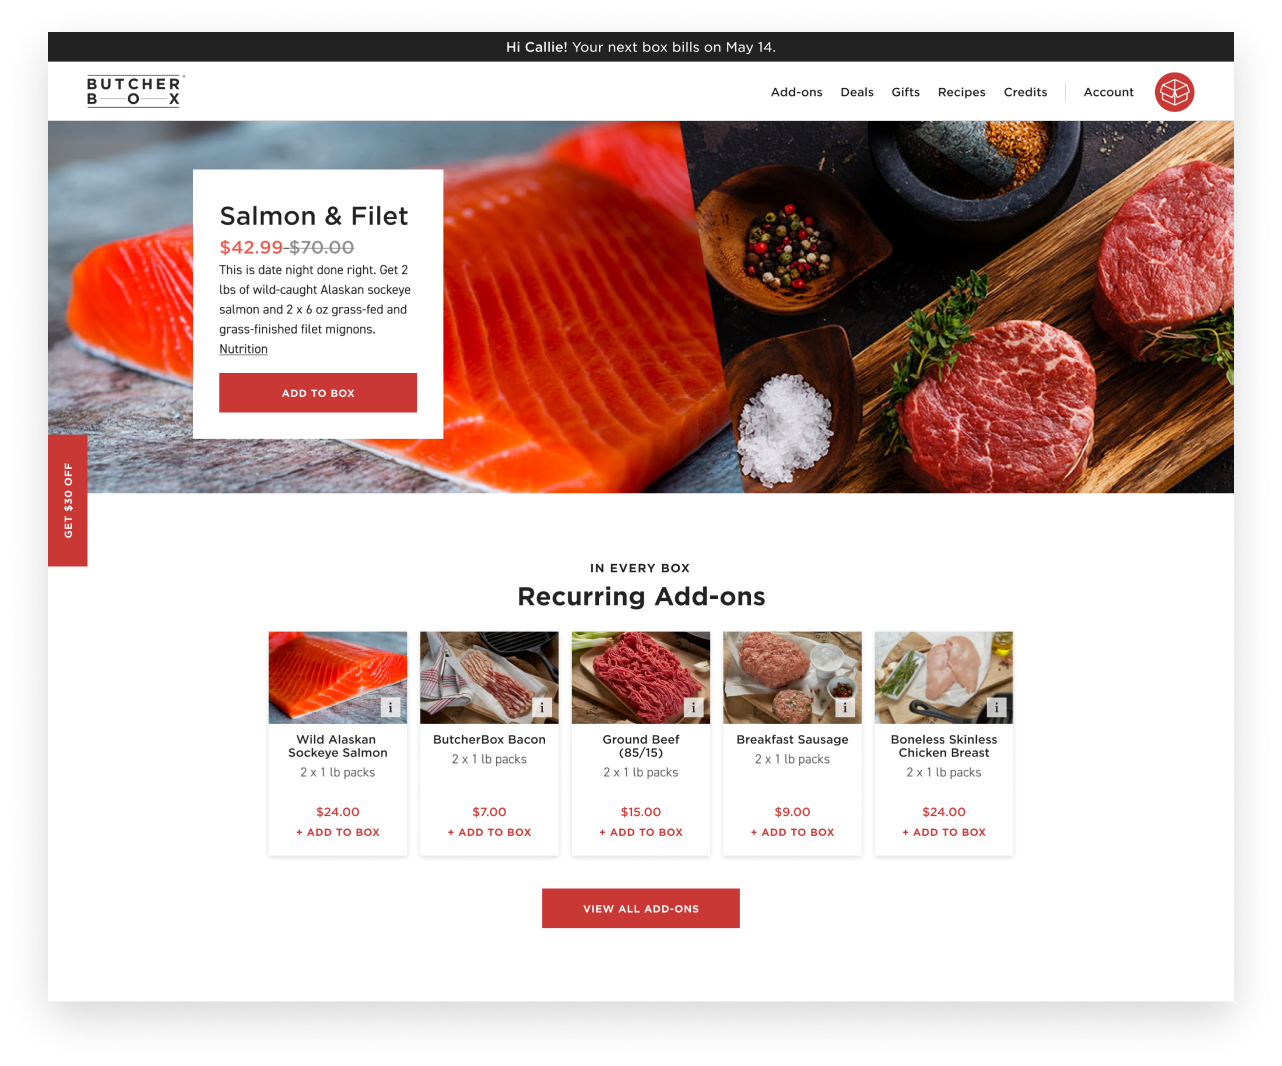 ButcherBox members have access to a member's only shopping experience where they can customize their next box.